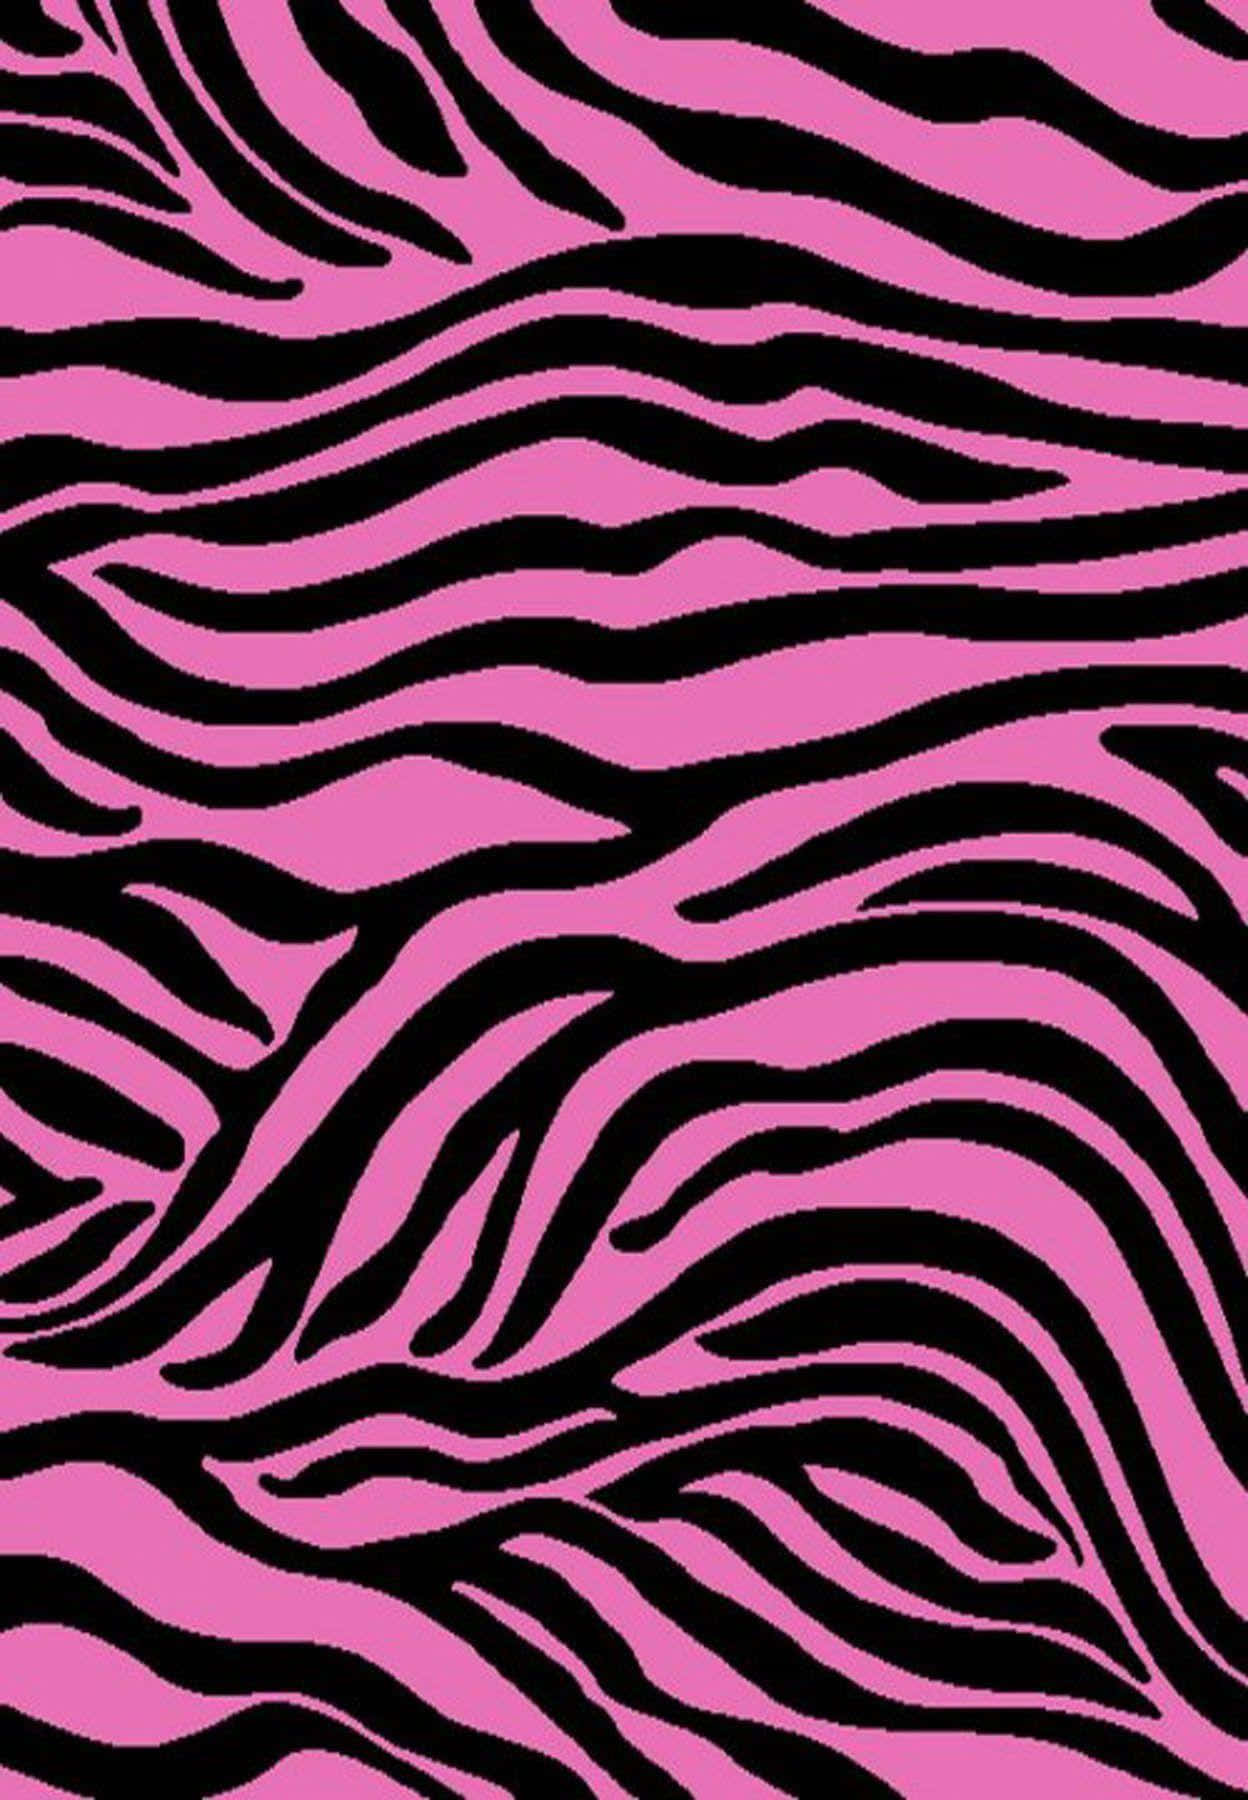 Download Wildly Colorful - Pink Zebra Pattern Wallpaper | Wallpapers.com